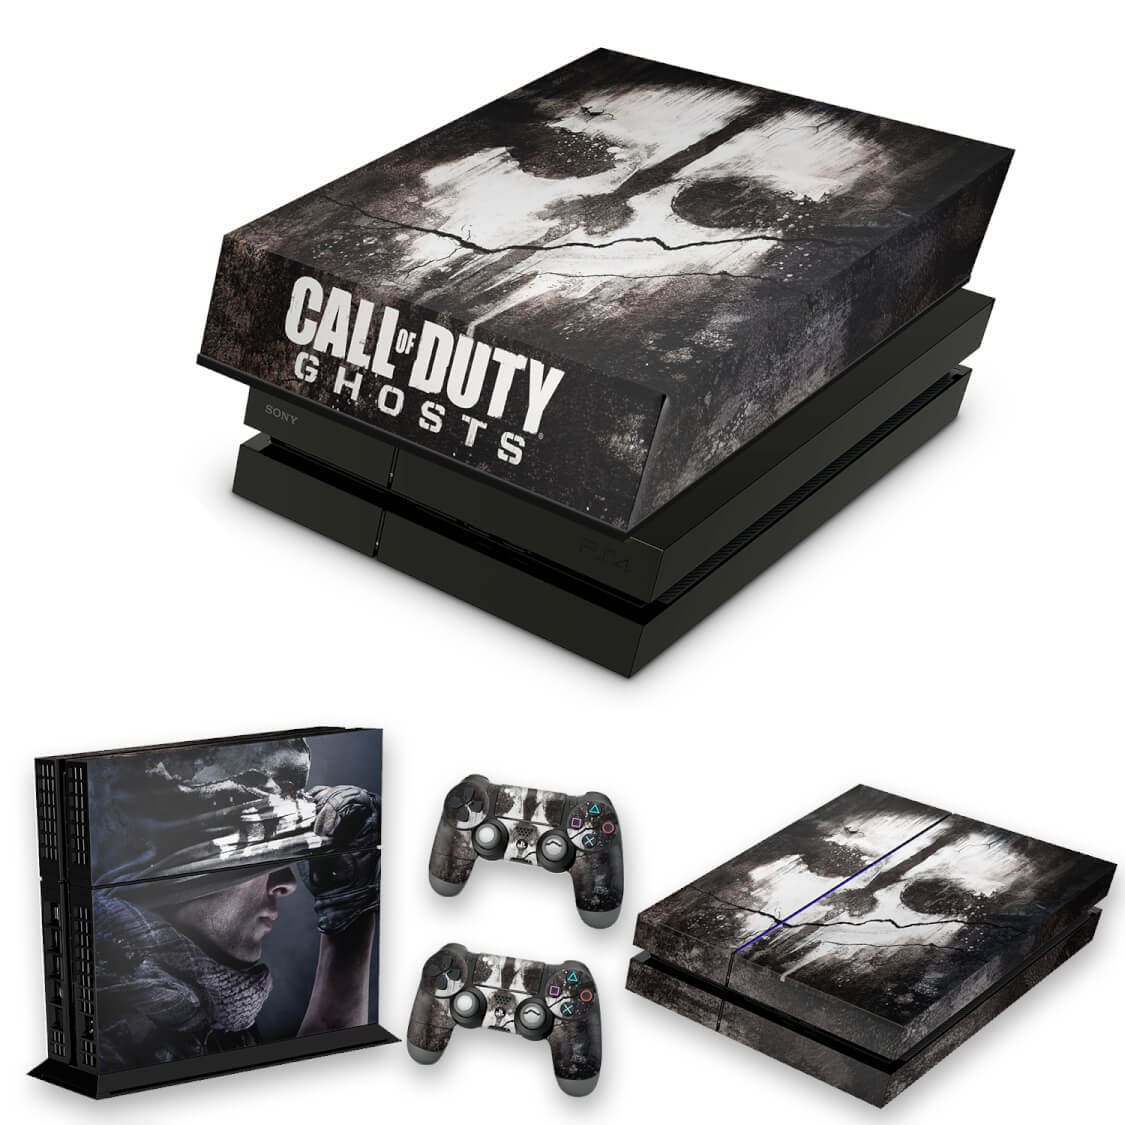 Call of Duty: Ghosts - PlayStation 4, PlayStation 4